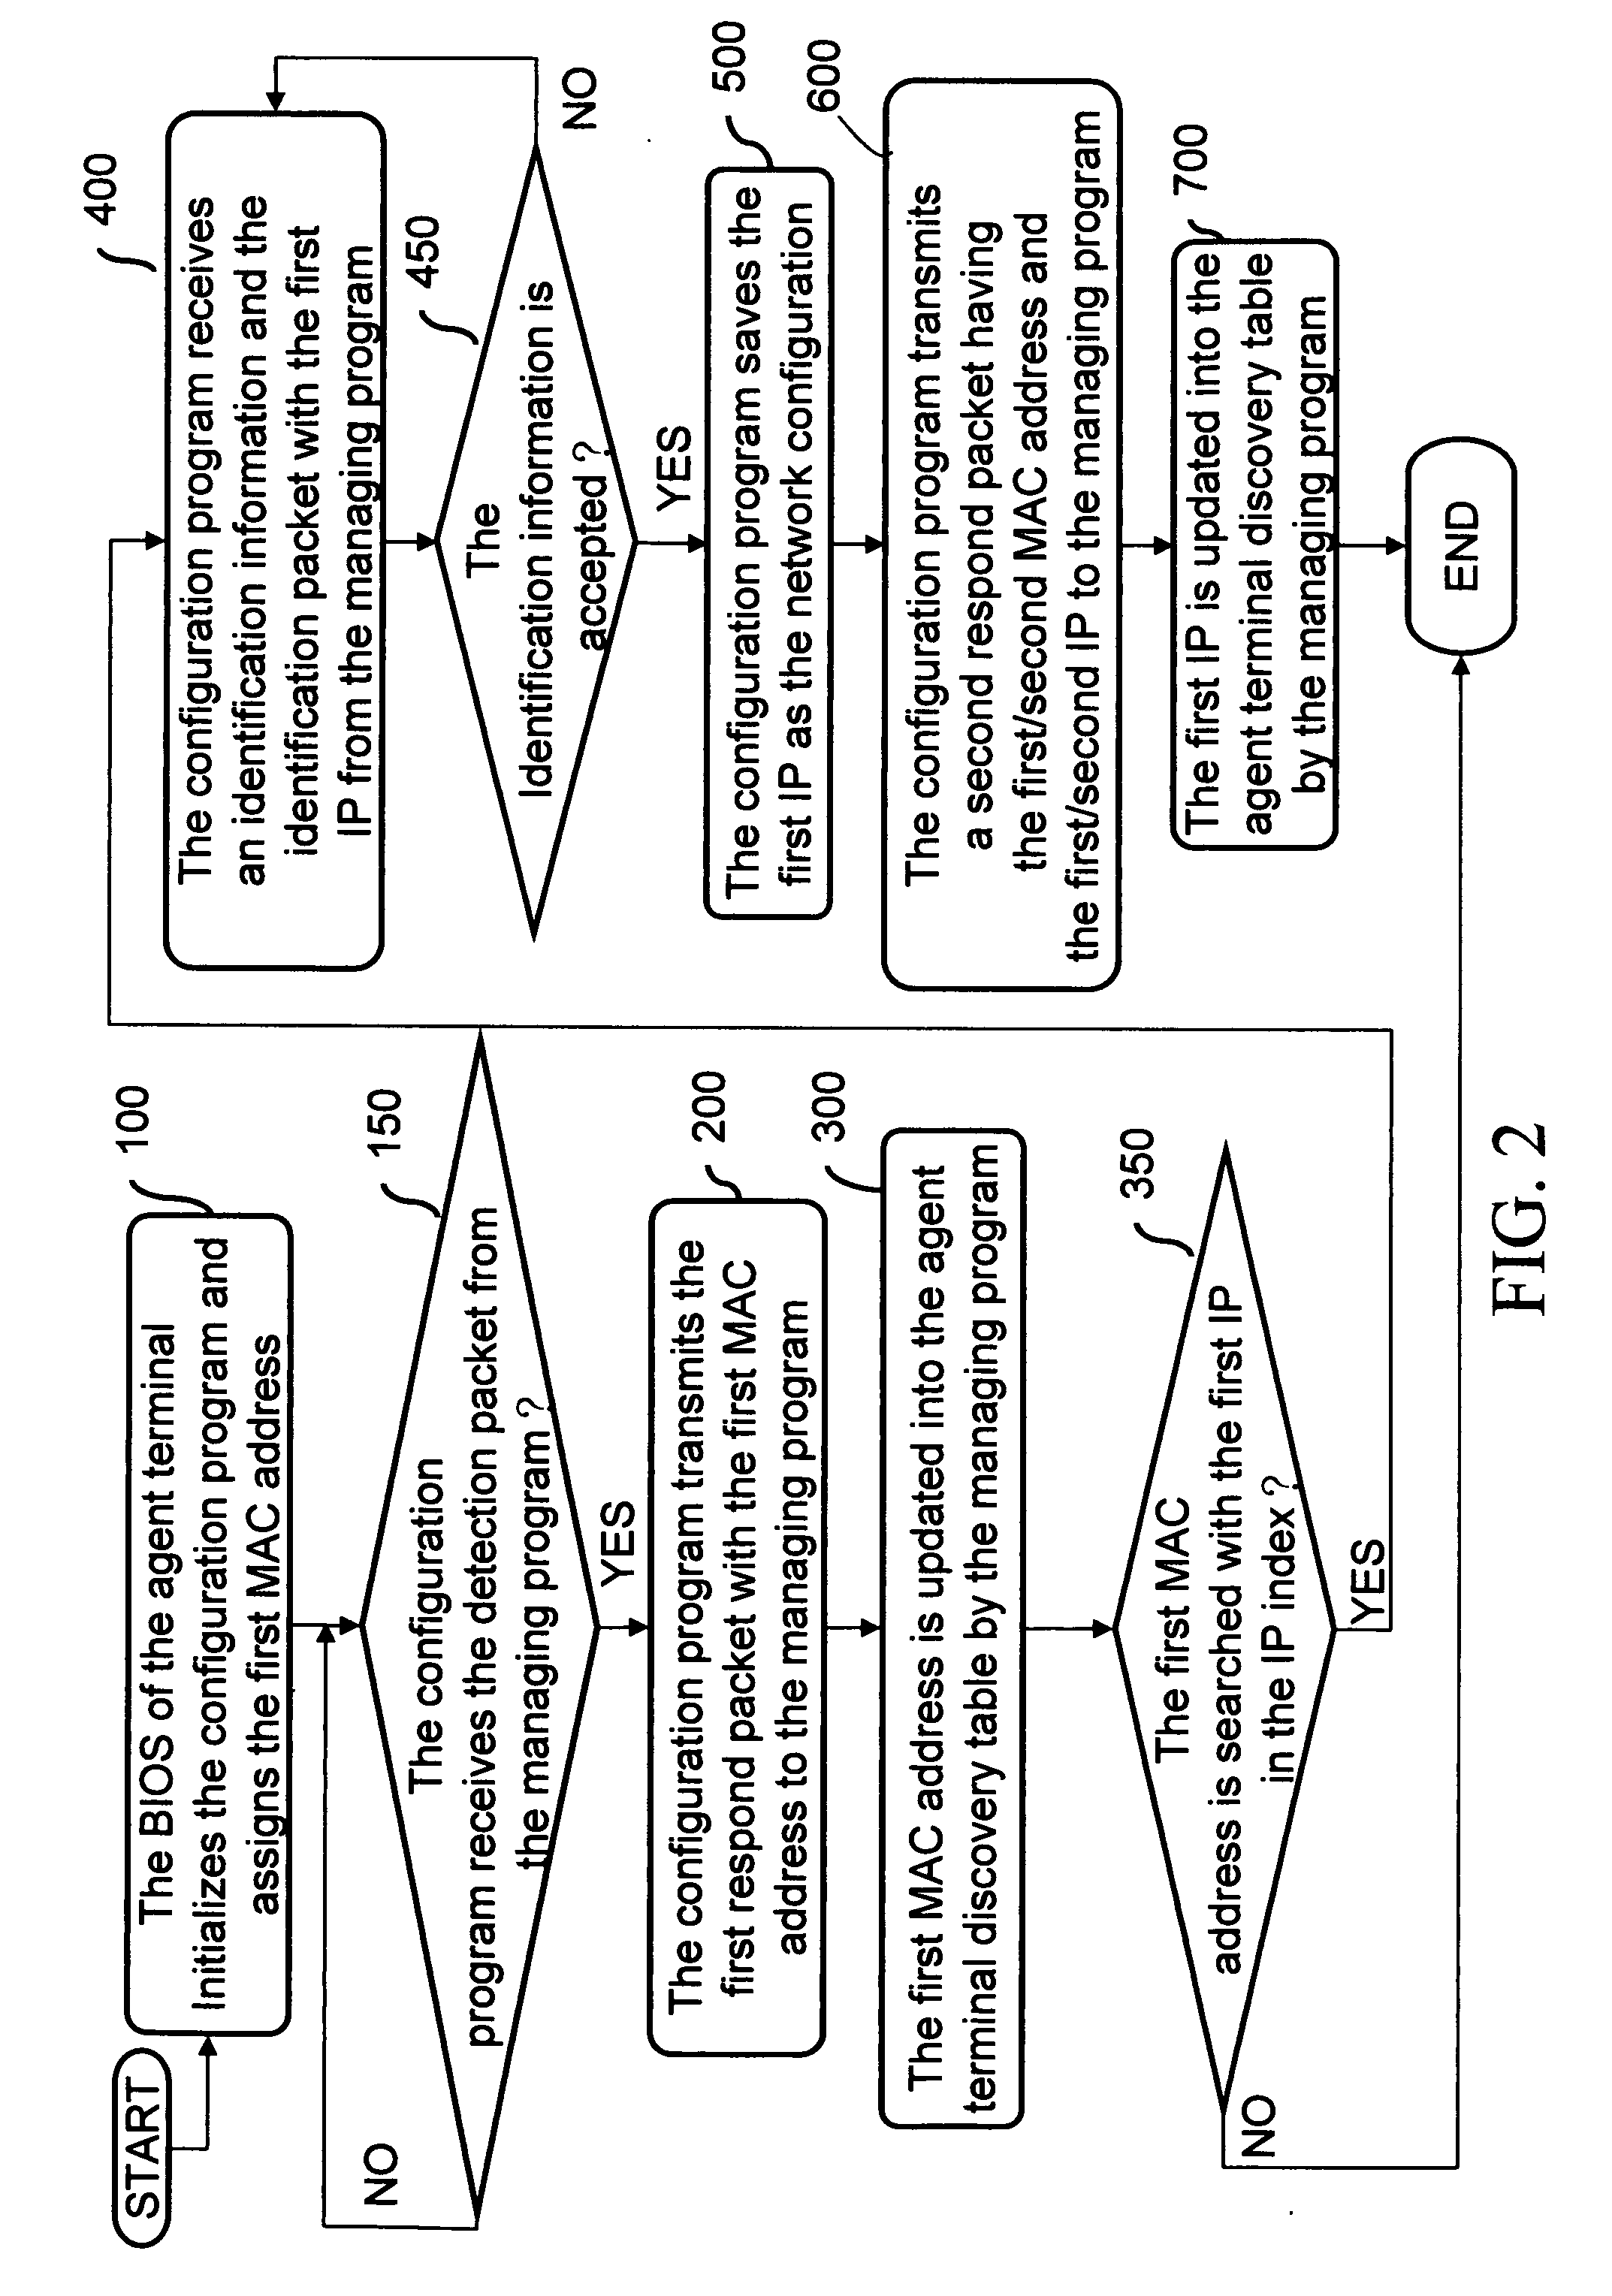 System and method for remote dynamic network configuration